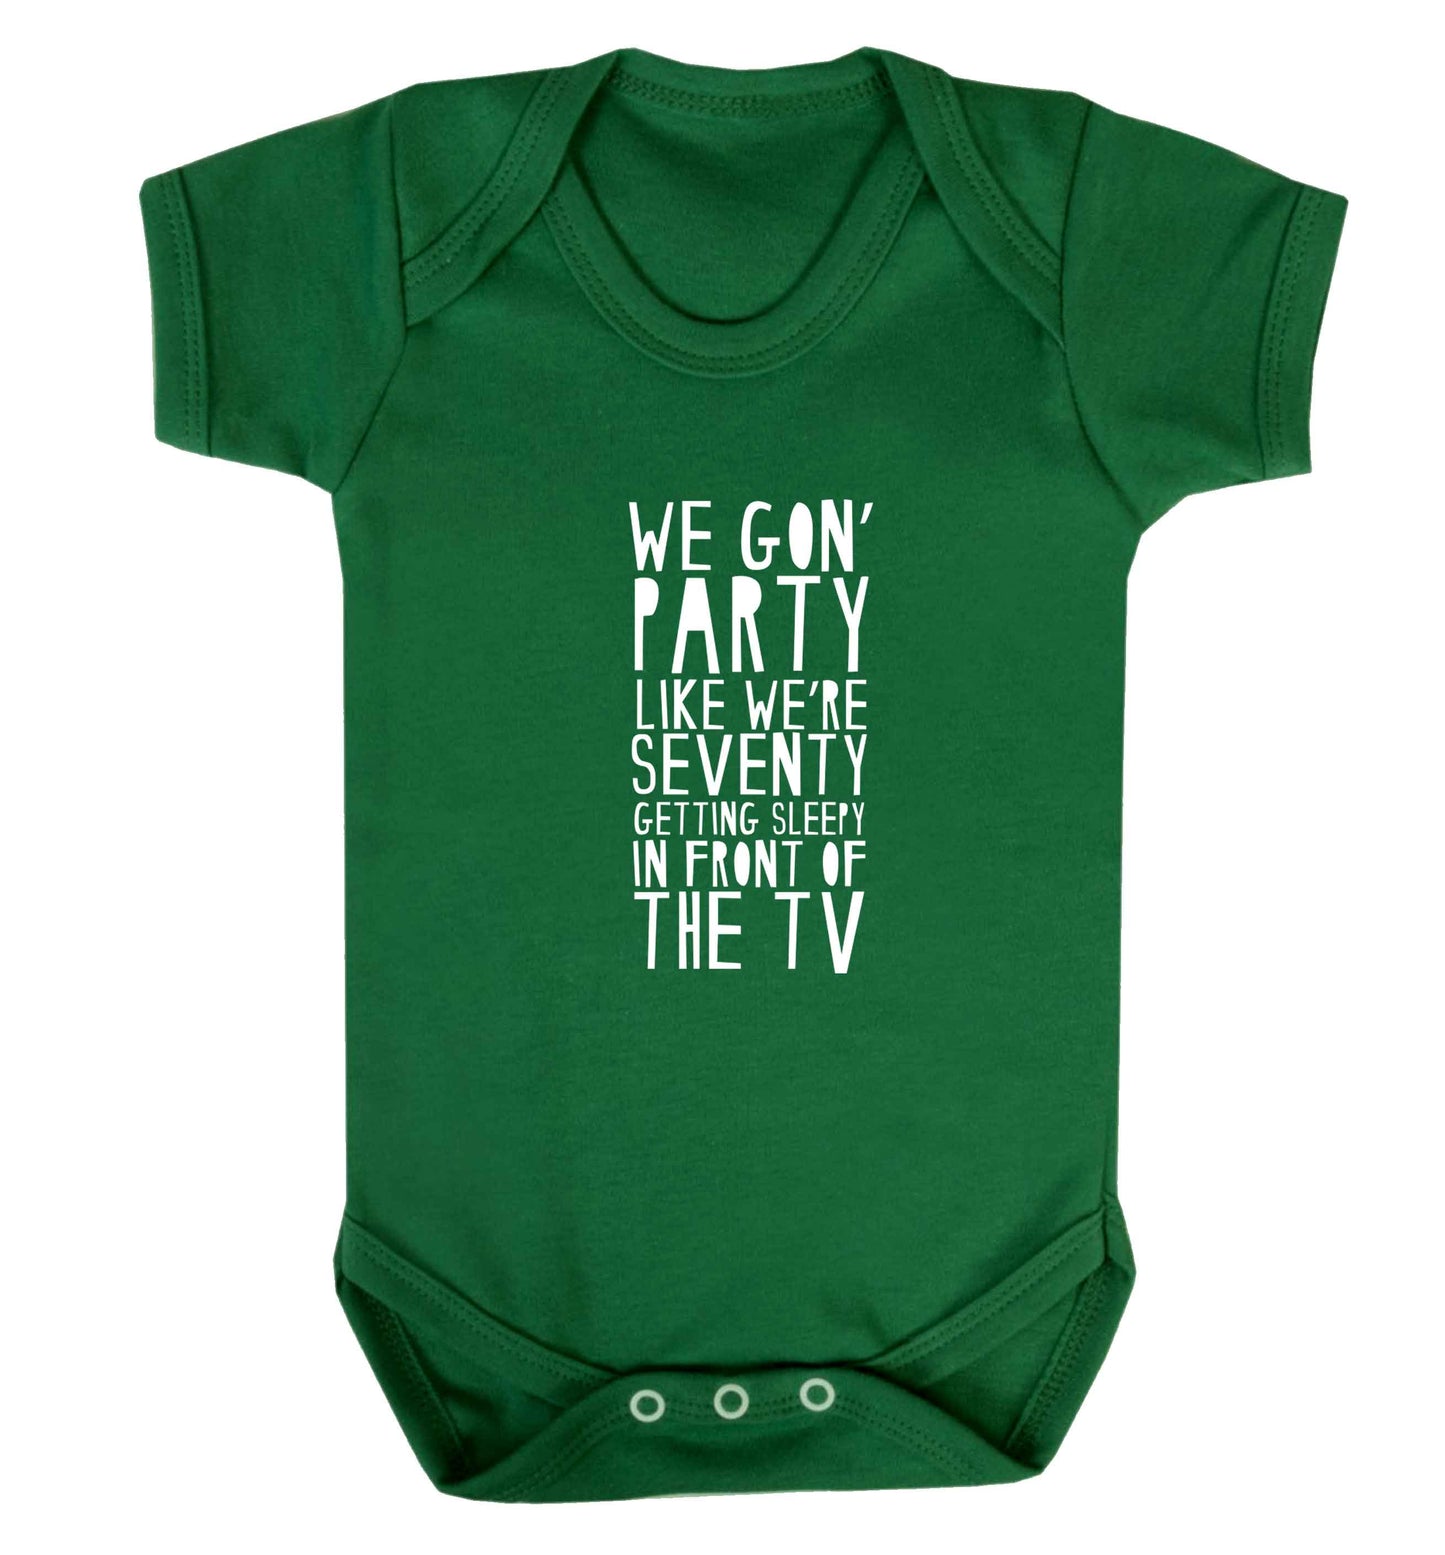 We gon' party like we're seventy getting sleepy in front of the TV baby vest green 18-24 months